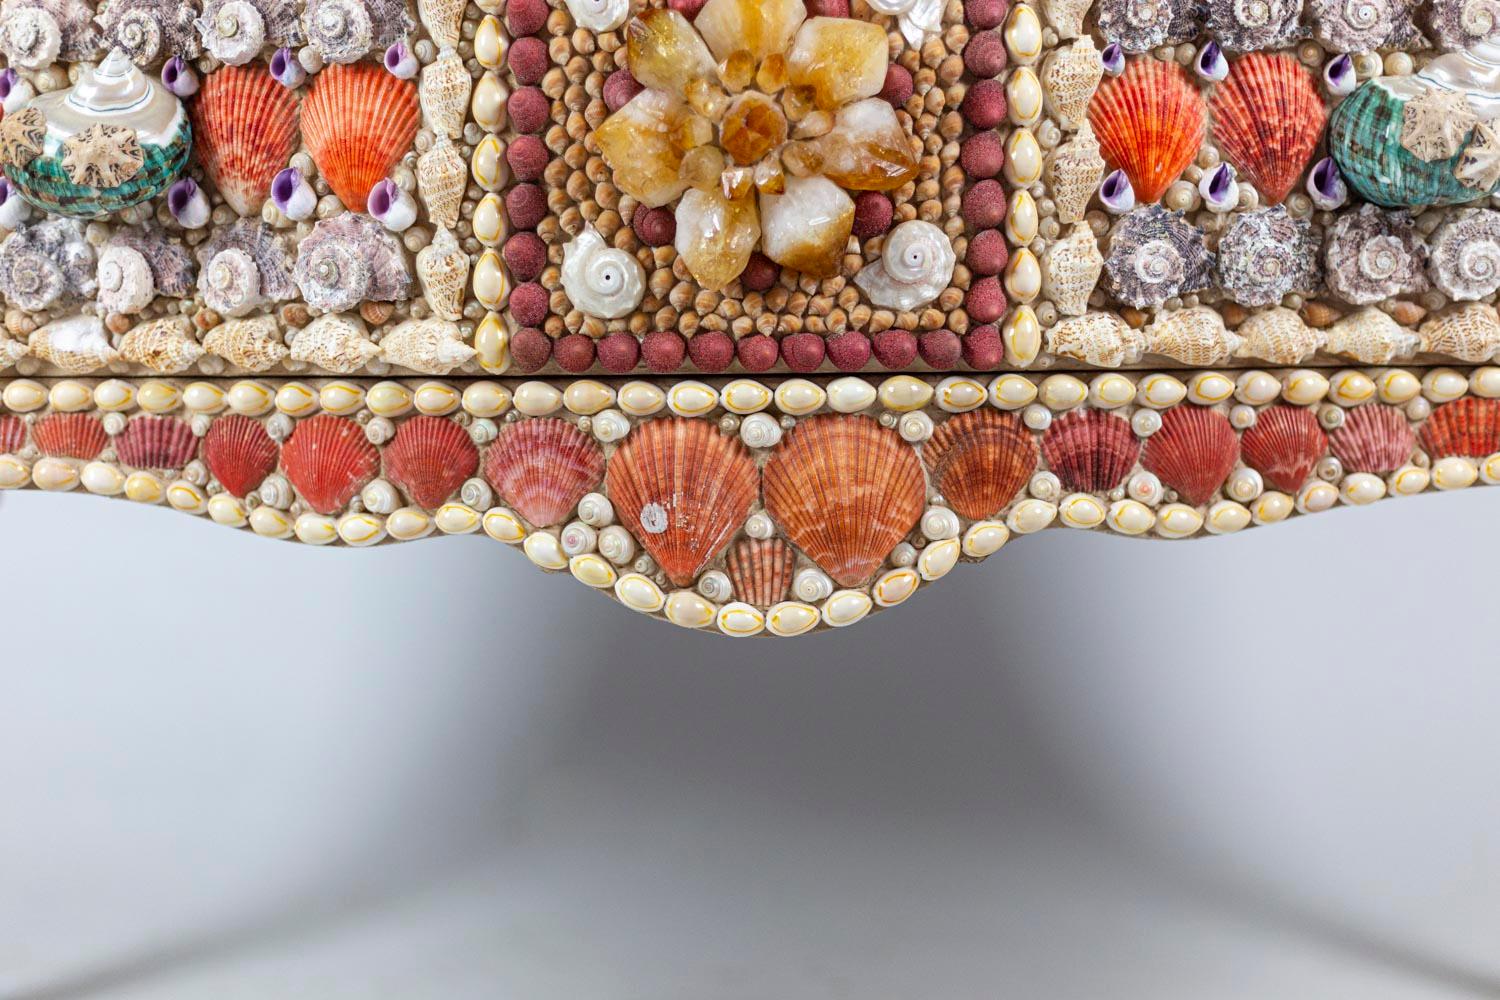 Louis XV Style Commode in Shells and Quartz, Contemporary Work 2